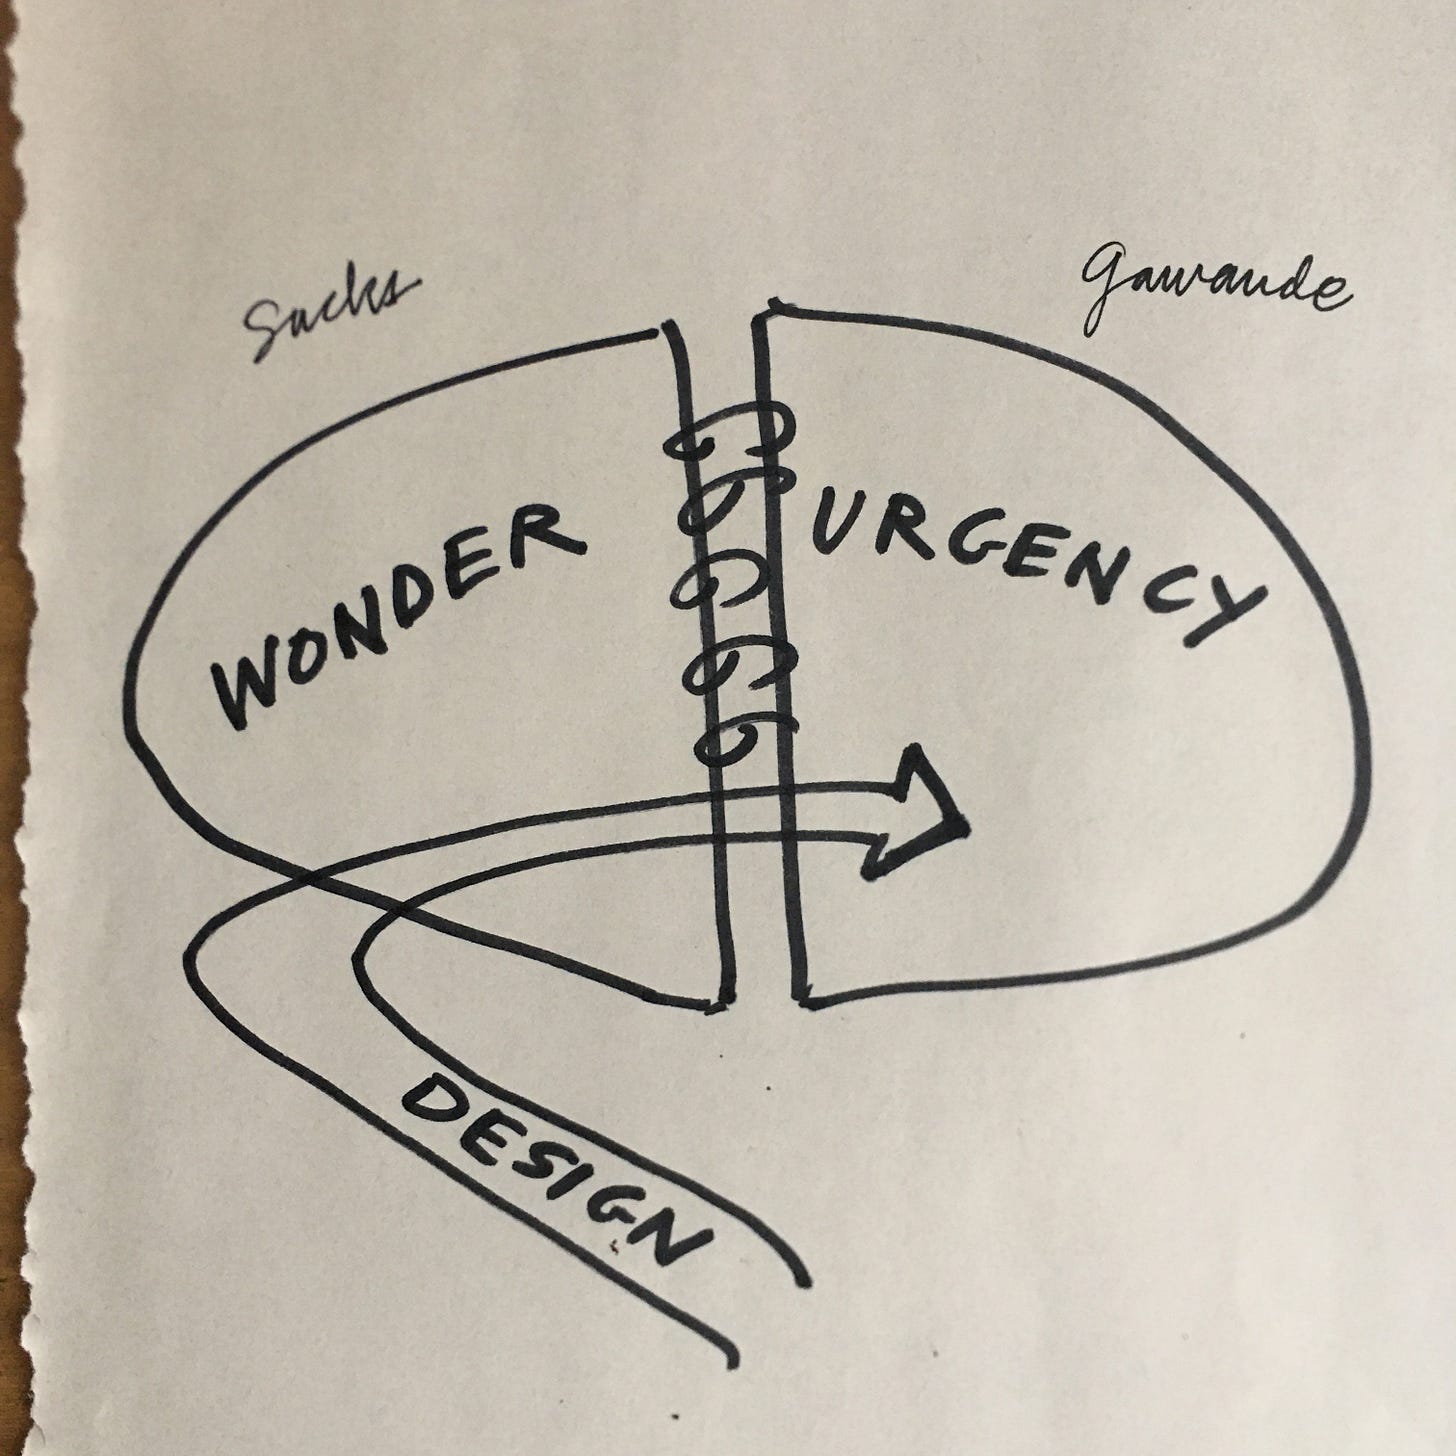 A piece of paper with a sketch in black ink: two halves of a circle, one marked "wonder" and the other "urgency, bound at the center by a series of coils, as in a notebook. Above wonder is the name "Sacks" and above "urgency" is the name "Gawande." An arrow at the bottom curves to enter the "wonder" sphere from the left, indicating a move from wonder to urgency, as left to right.